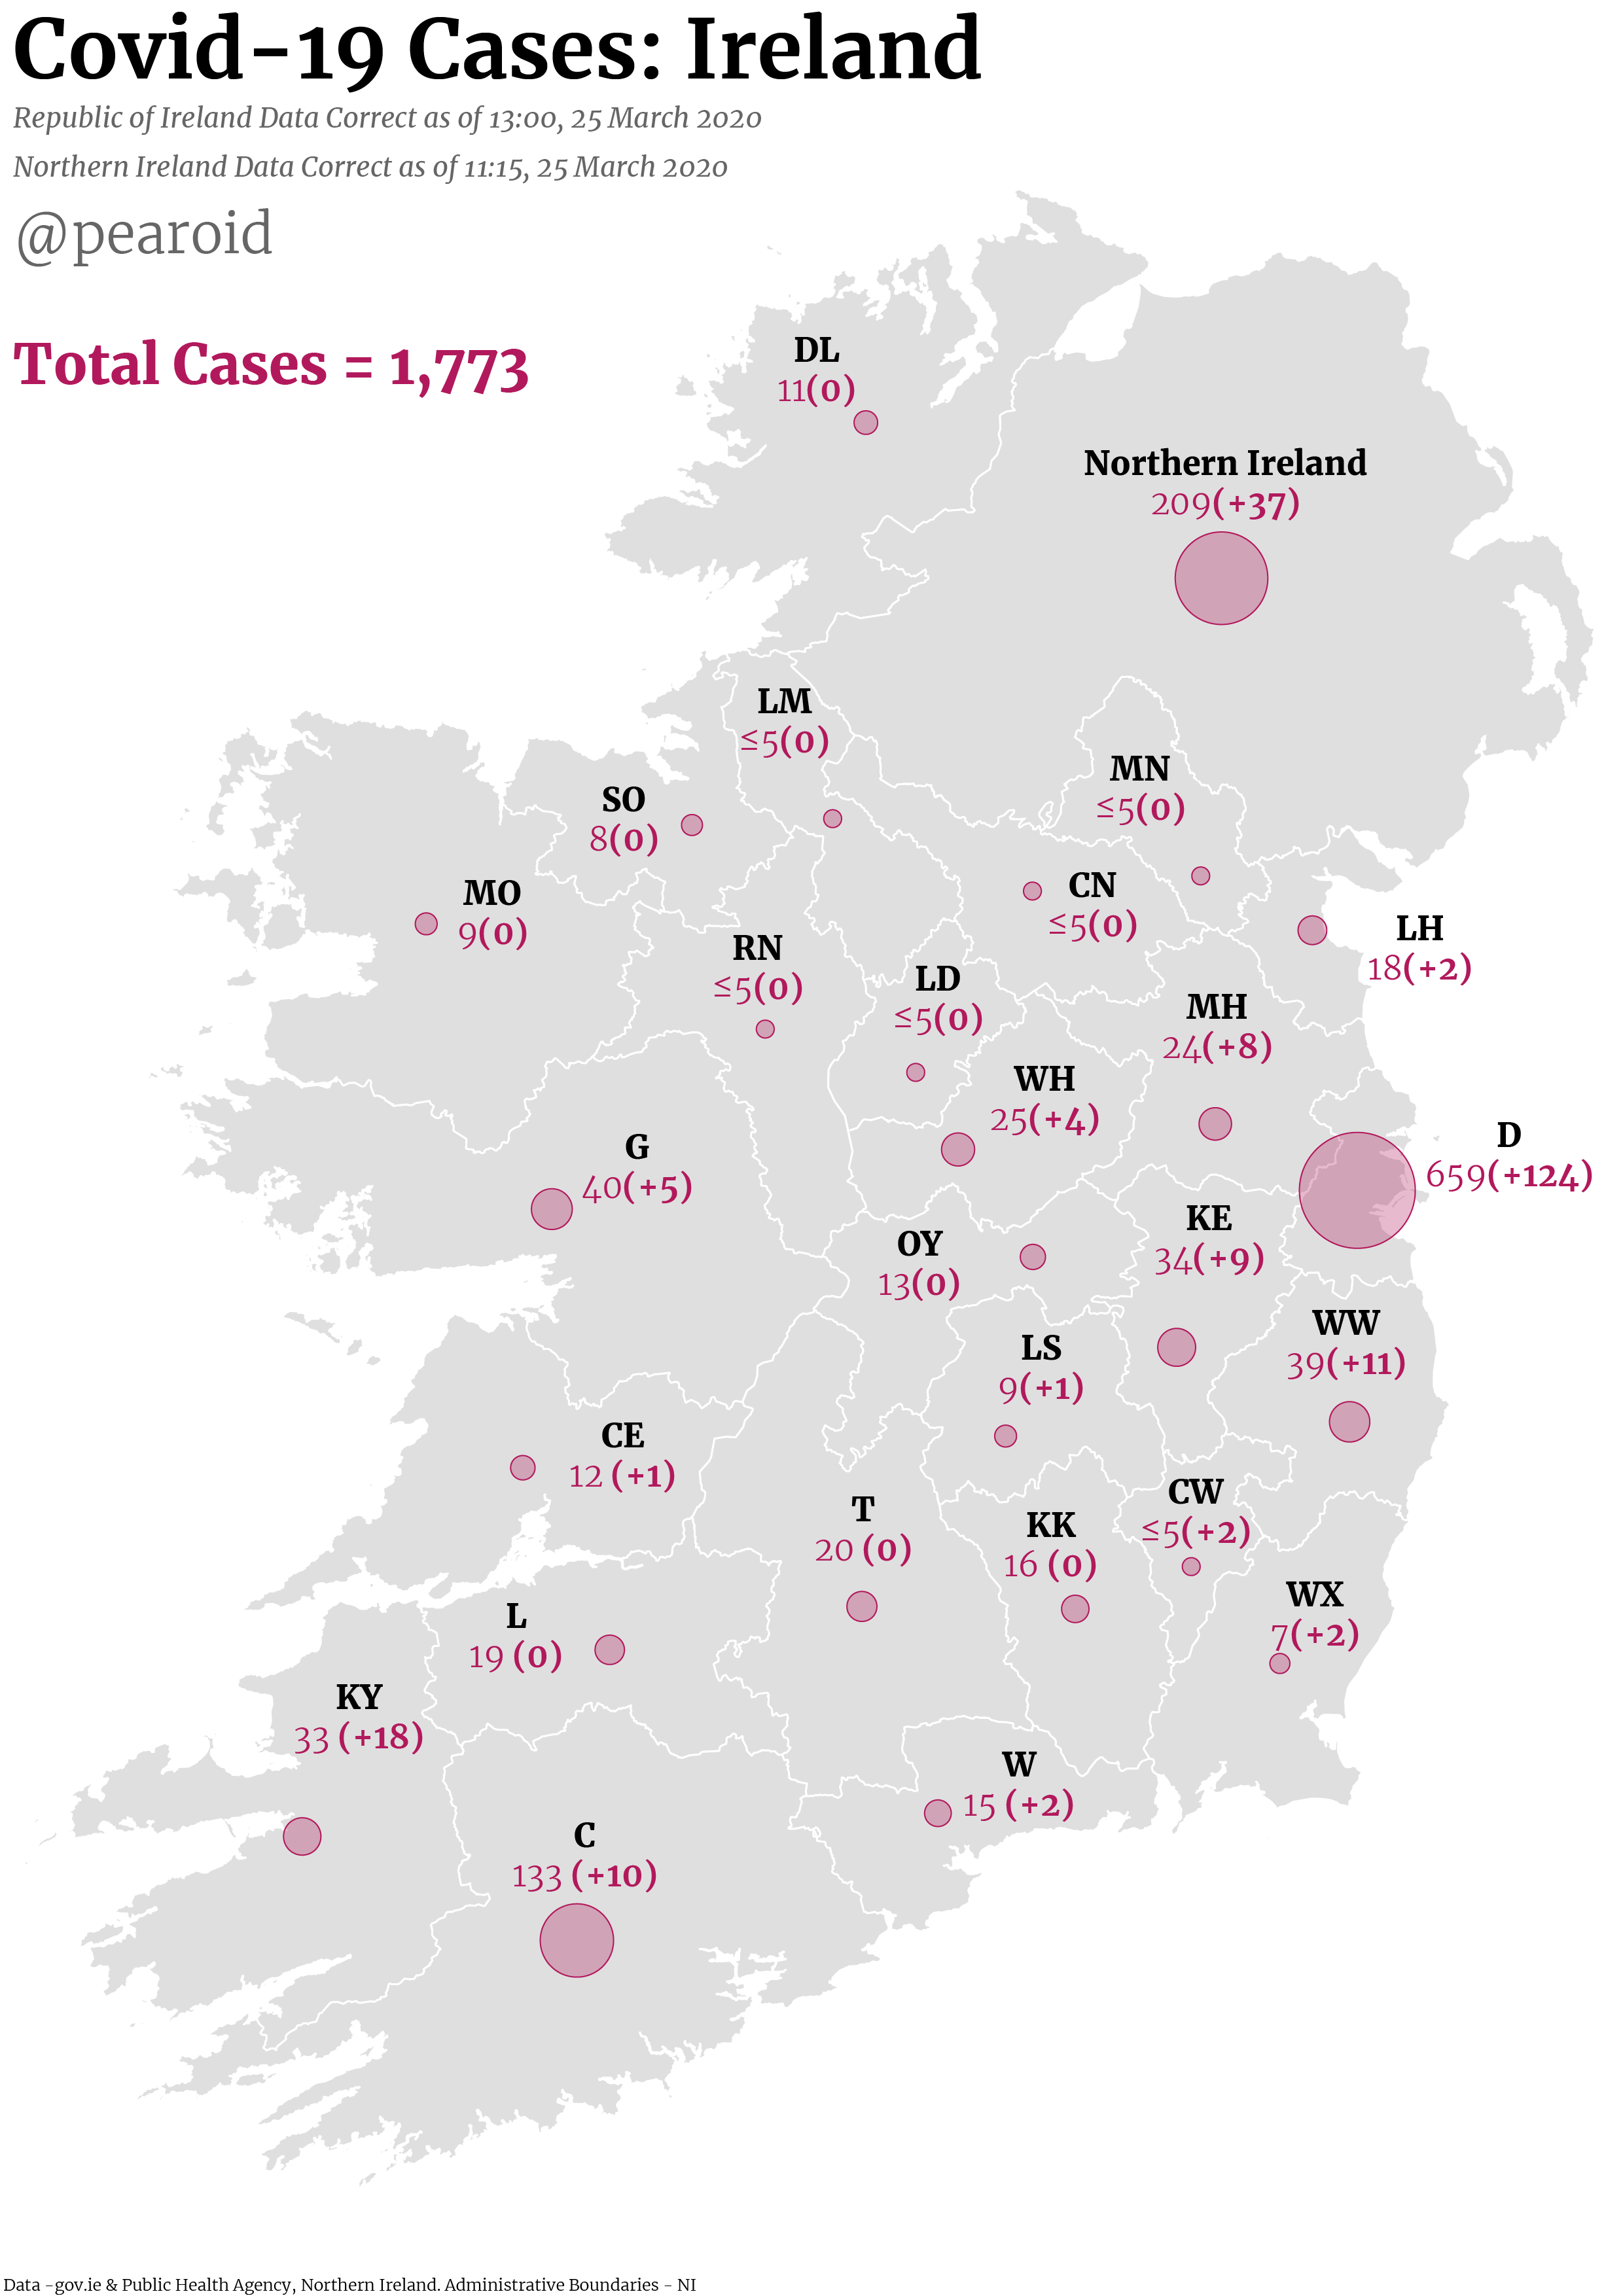 Map of Covid-19 Cases in Ireland-25 March 2019